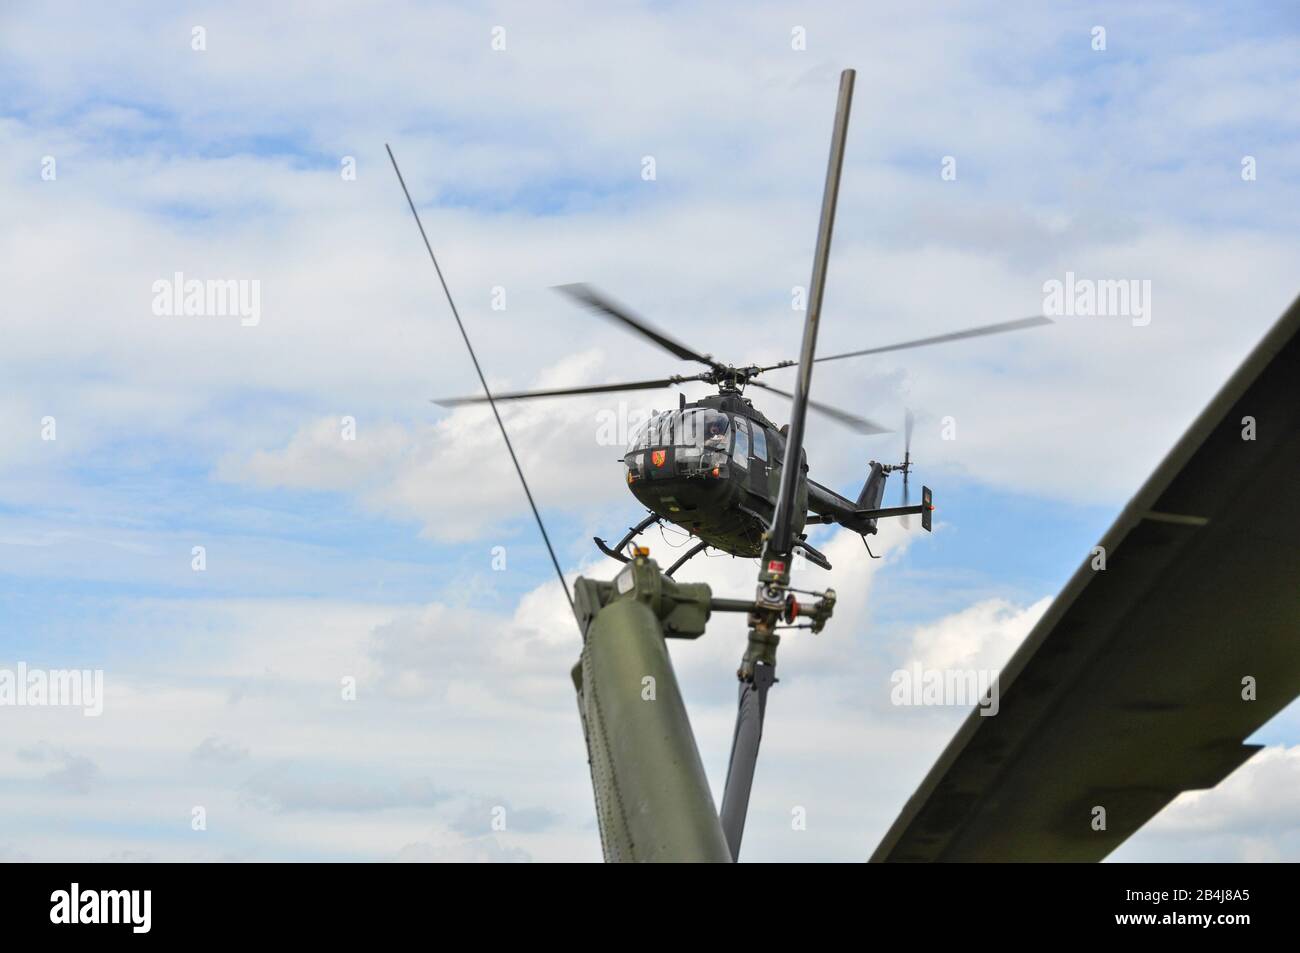 Germany, Saxony-Anhalt, Fischbeck, helicopter of the Bundeswehr lands, dyke break at Fischbeck, century flood in 2013, Germany. Stock Photo